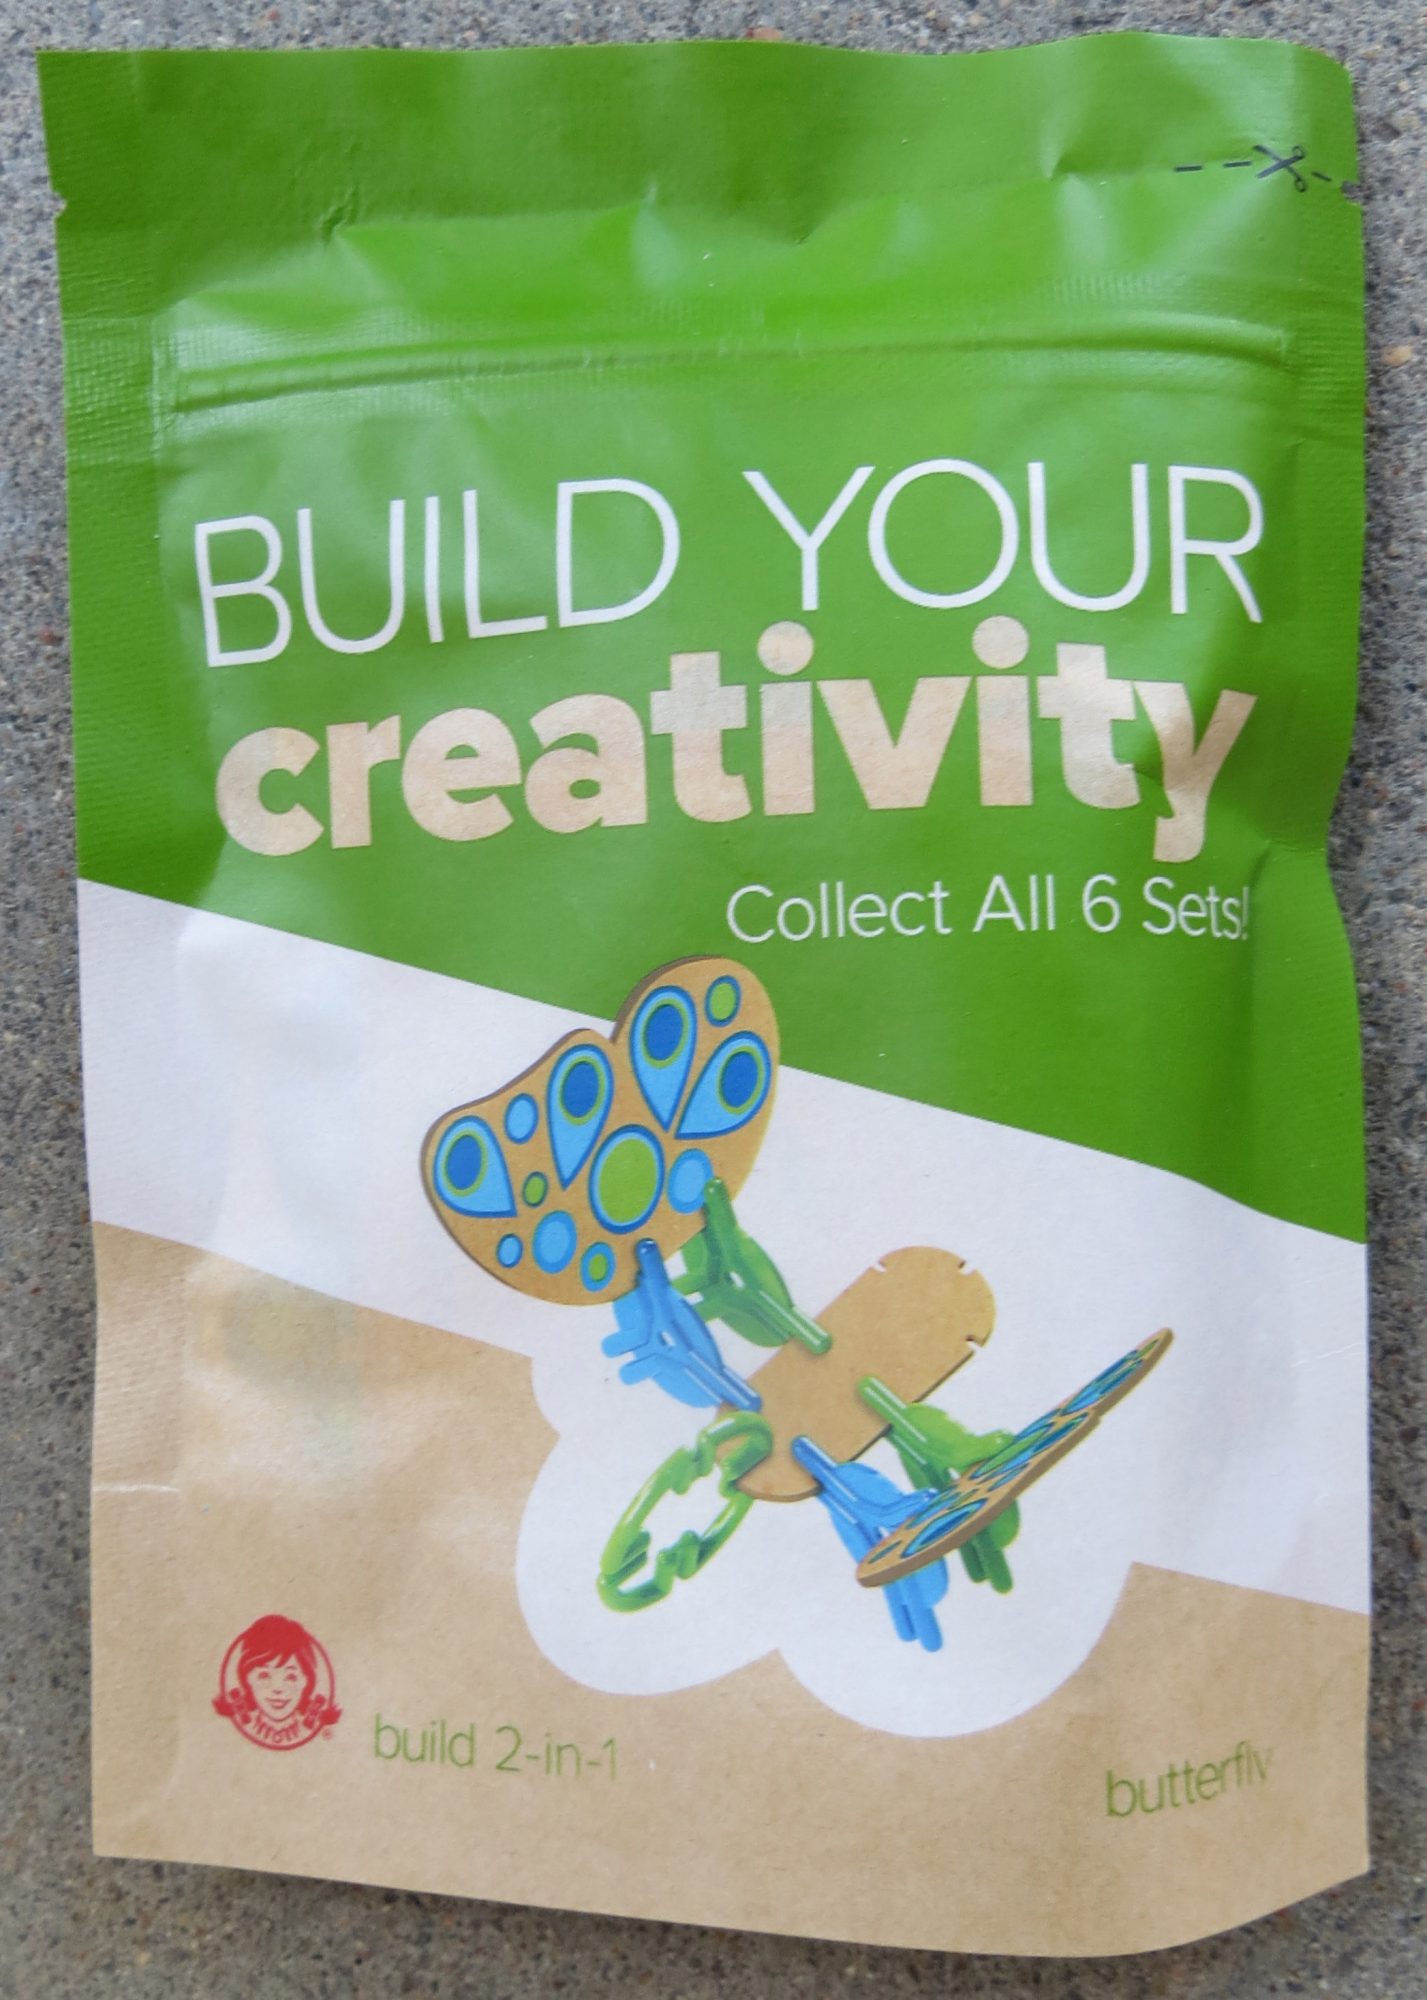 Various Wendy’s Kids Meal Build Your Creativity Toys 